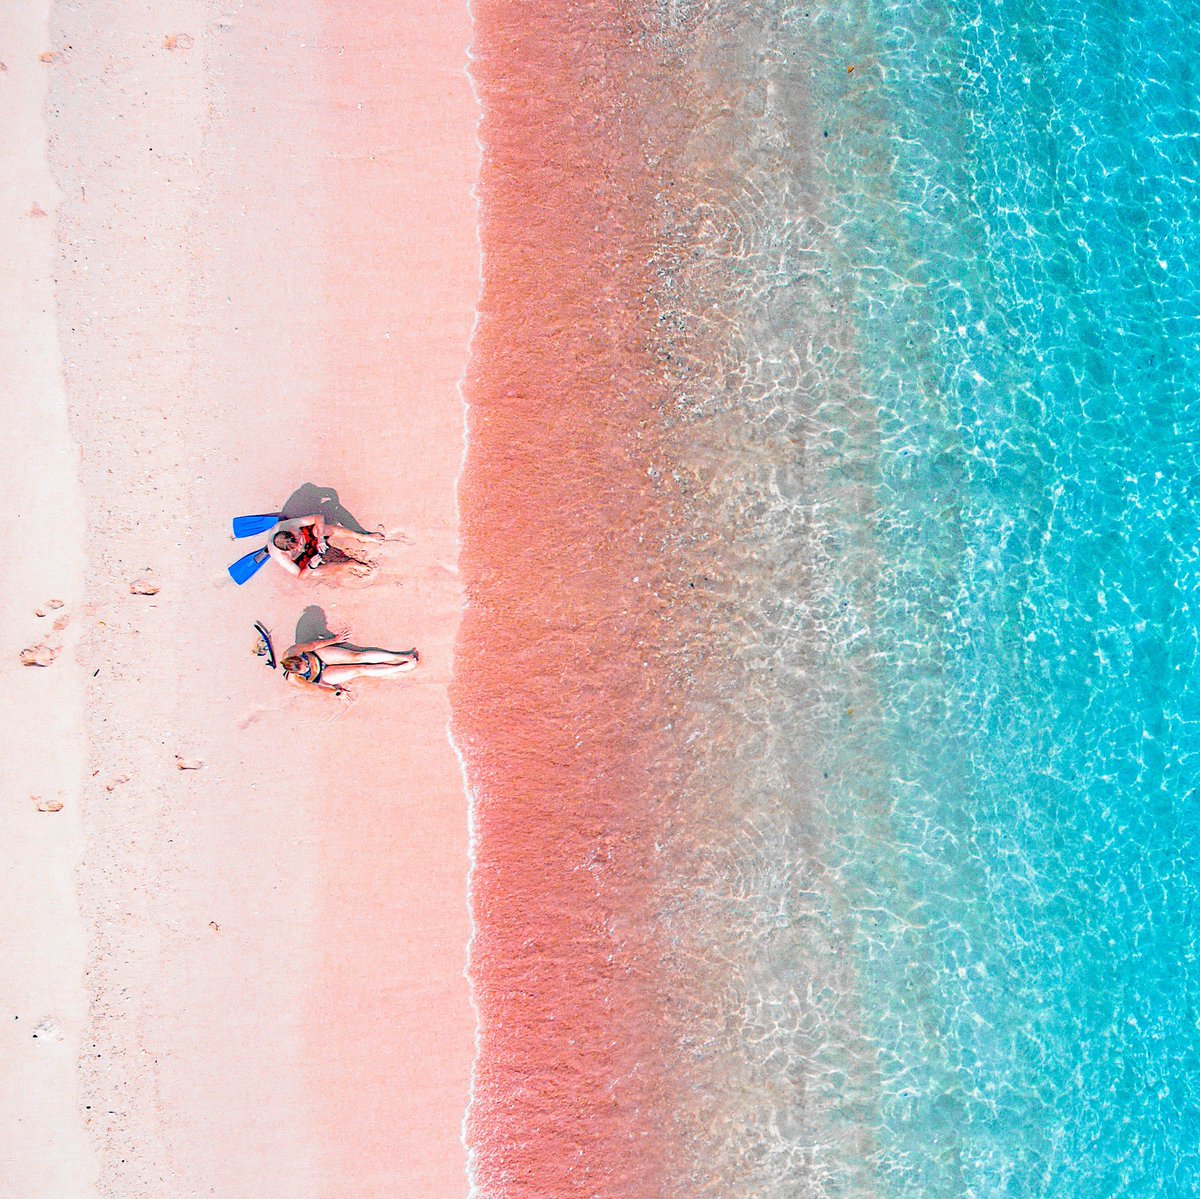 Dreams are made of pink sand and turquoise water. 

#PinkBeach #ExploreLombok #WonderfulIndonesia